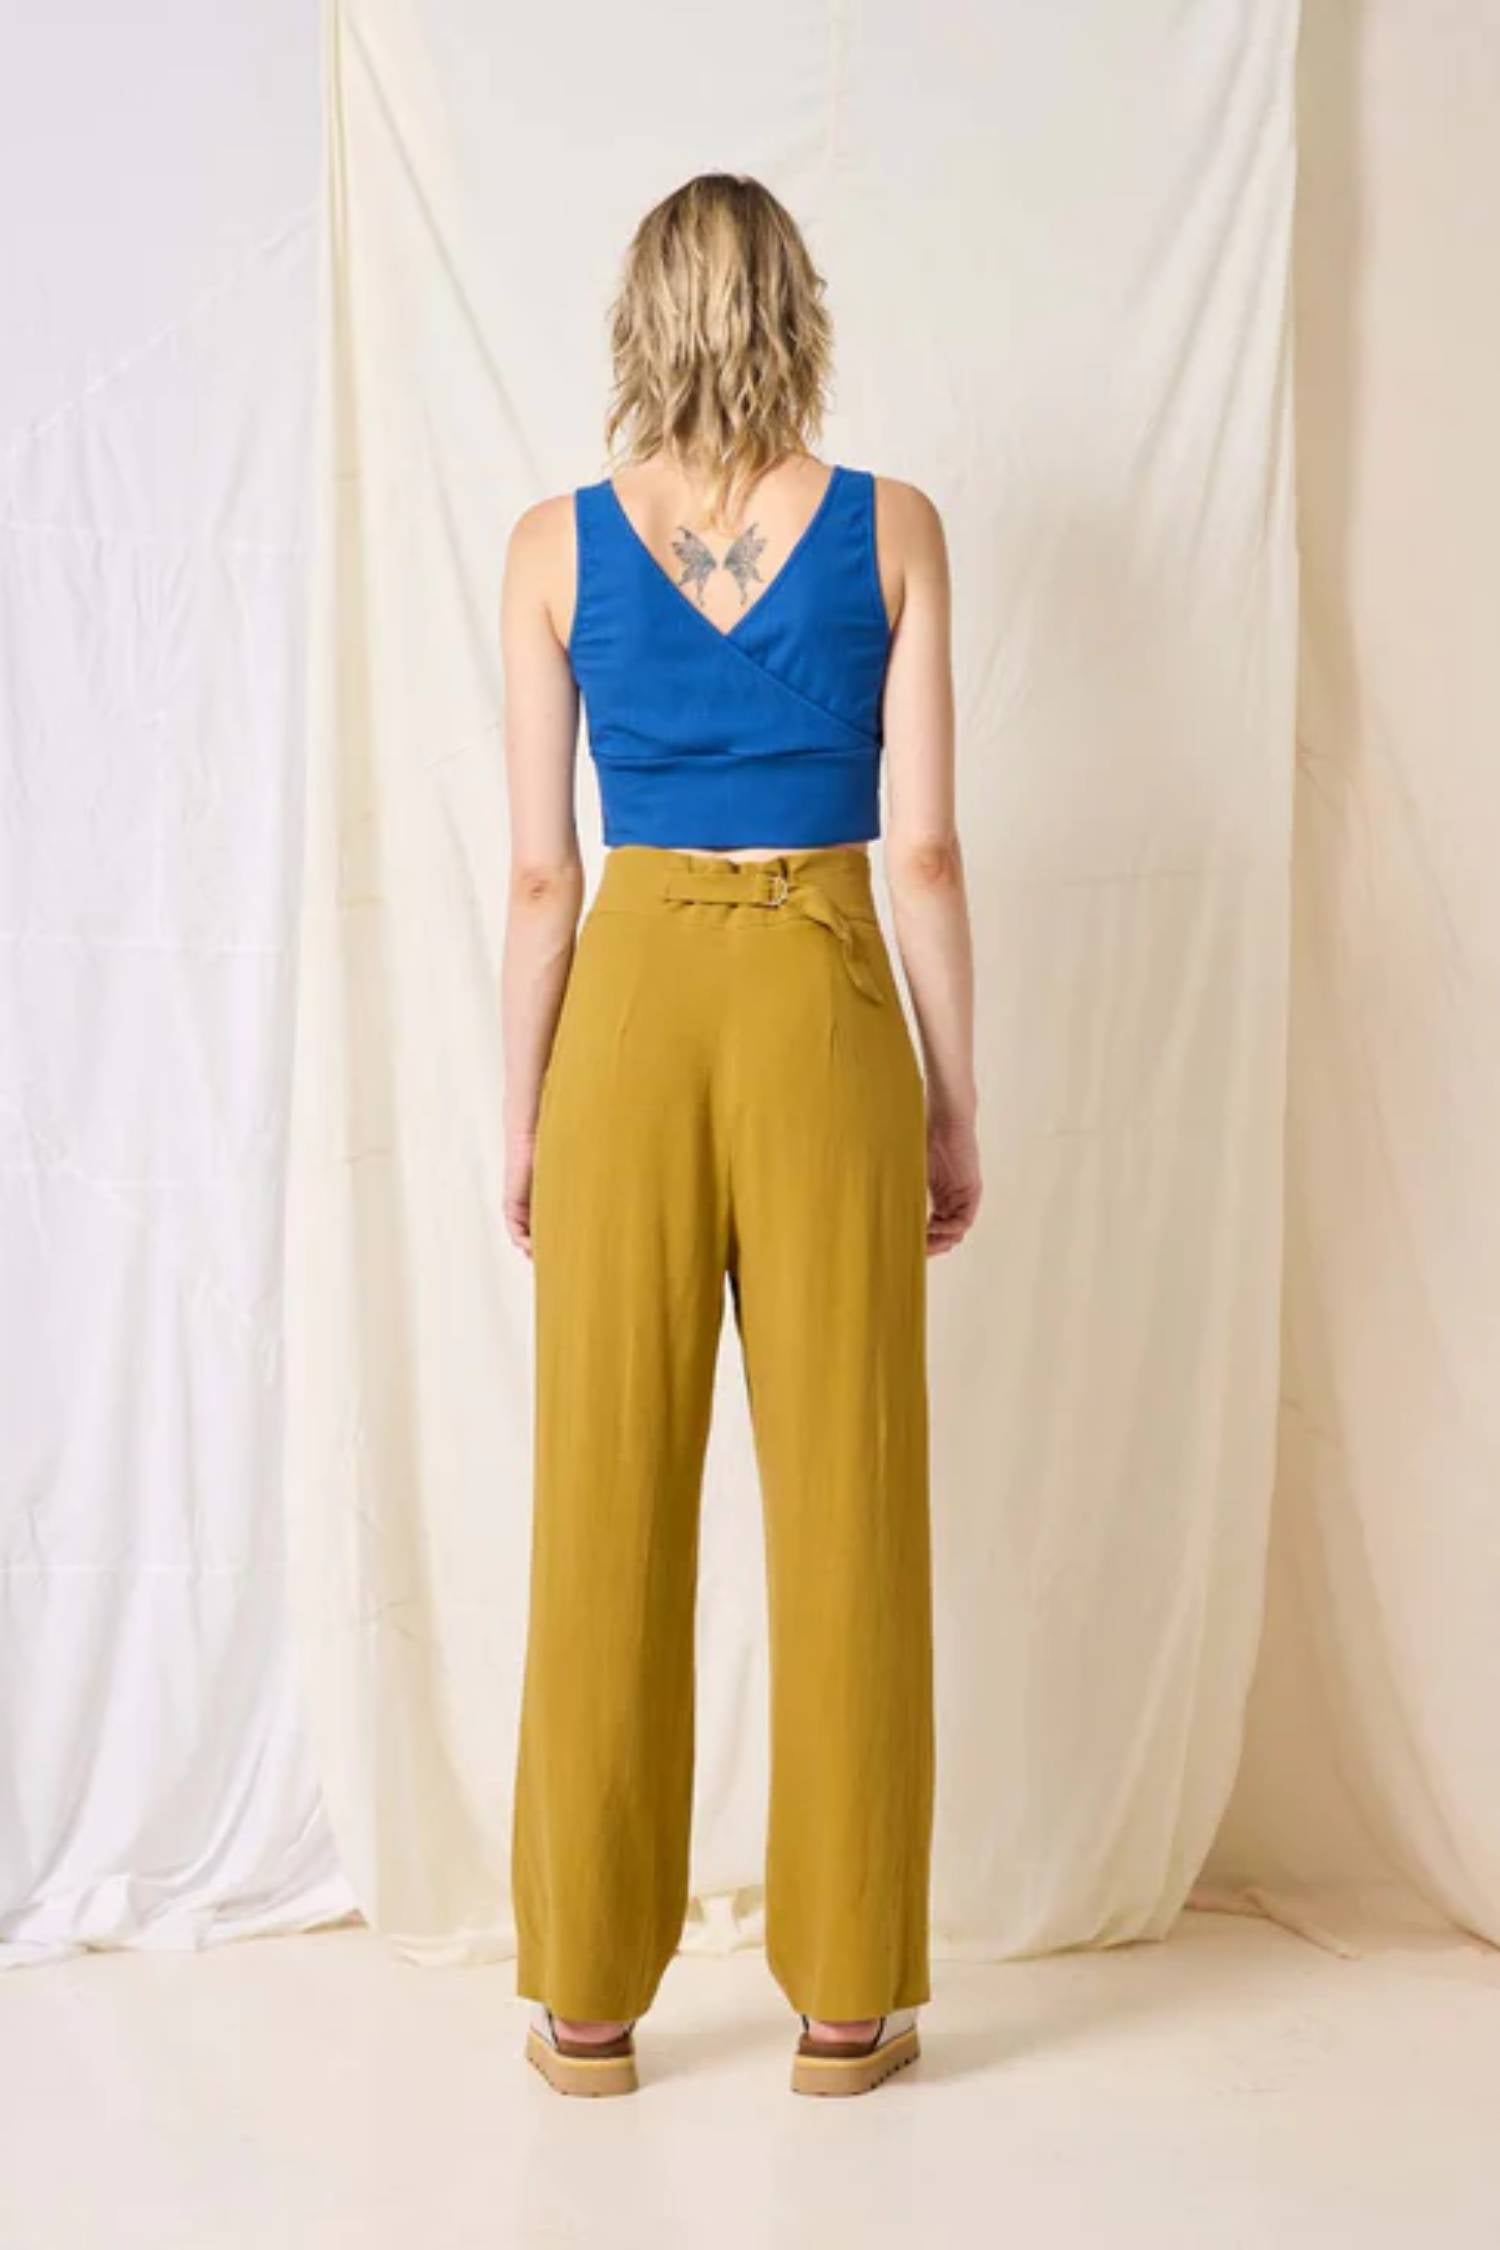 Acacia Pants by Cokluch, Pistachio, back view, high waist, wide rounded waist band, two button closure in front, ring belt closure in back, front pleats, side pockets, eco-fabric, OEKO-TEX,  sizes XS to XL, made in Montreal 